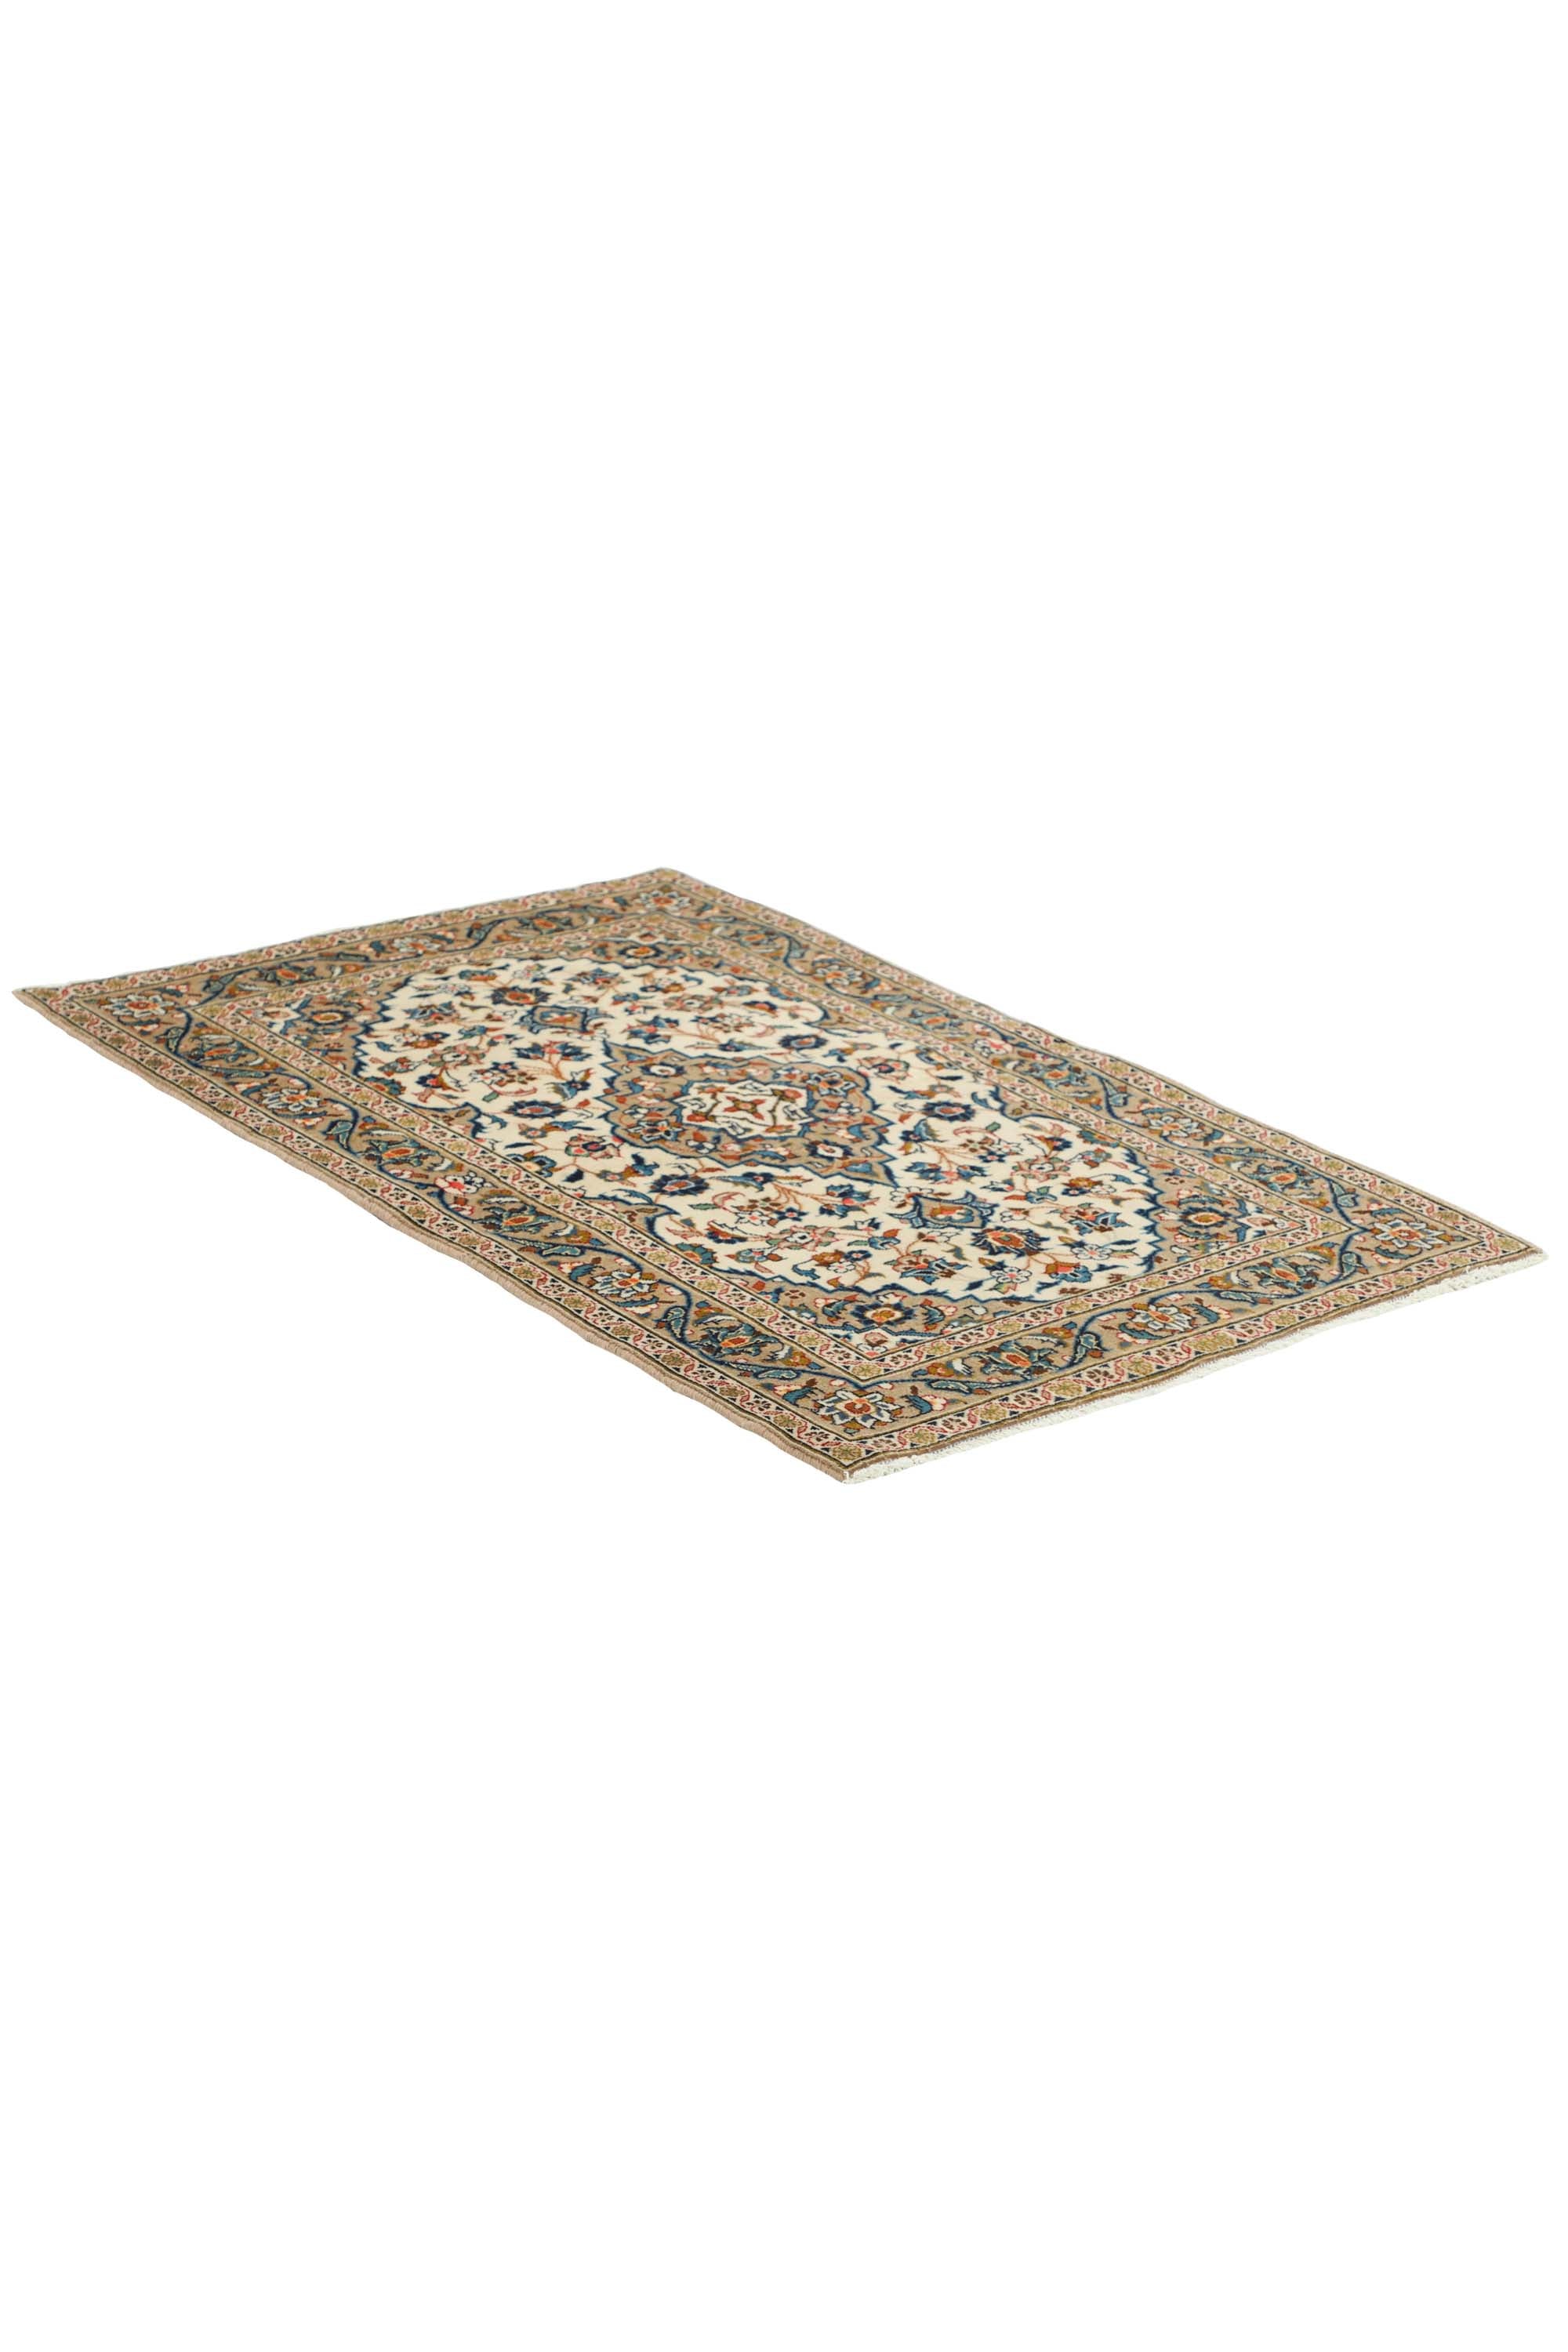 Bordered brown, cream, blue and red Keshan Persian Rug